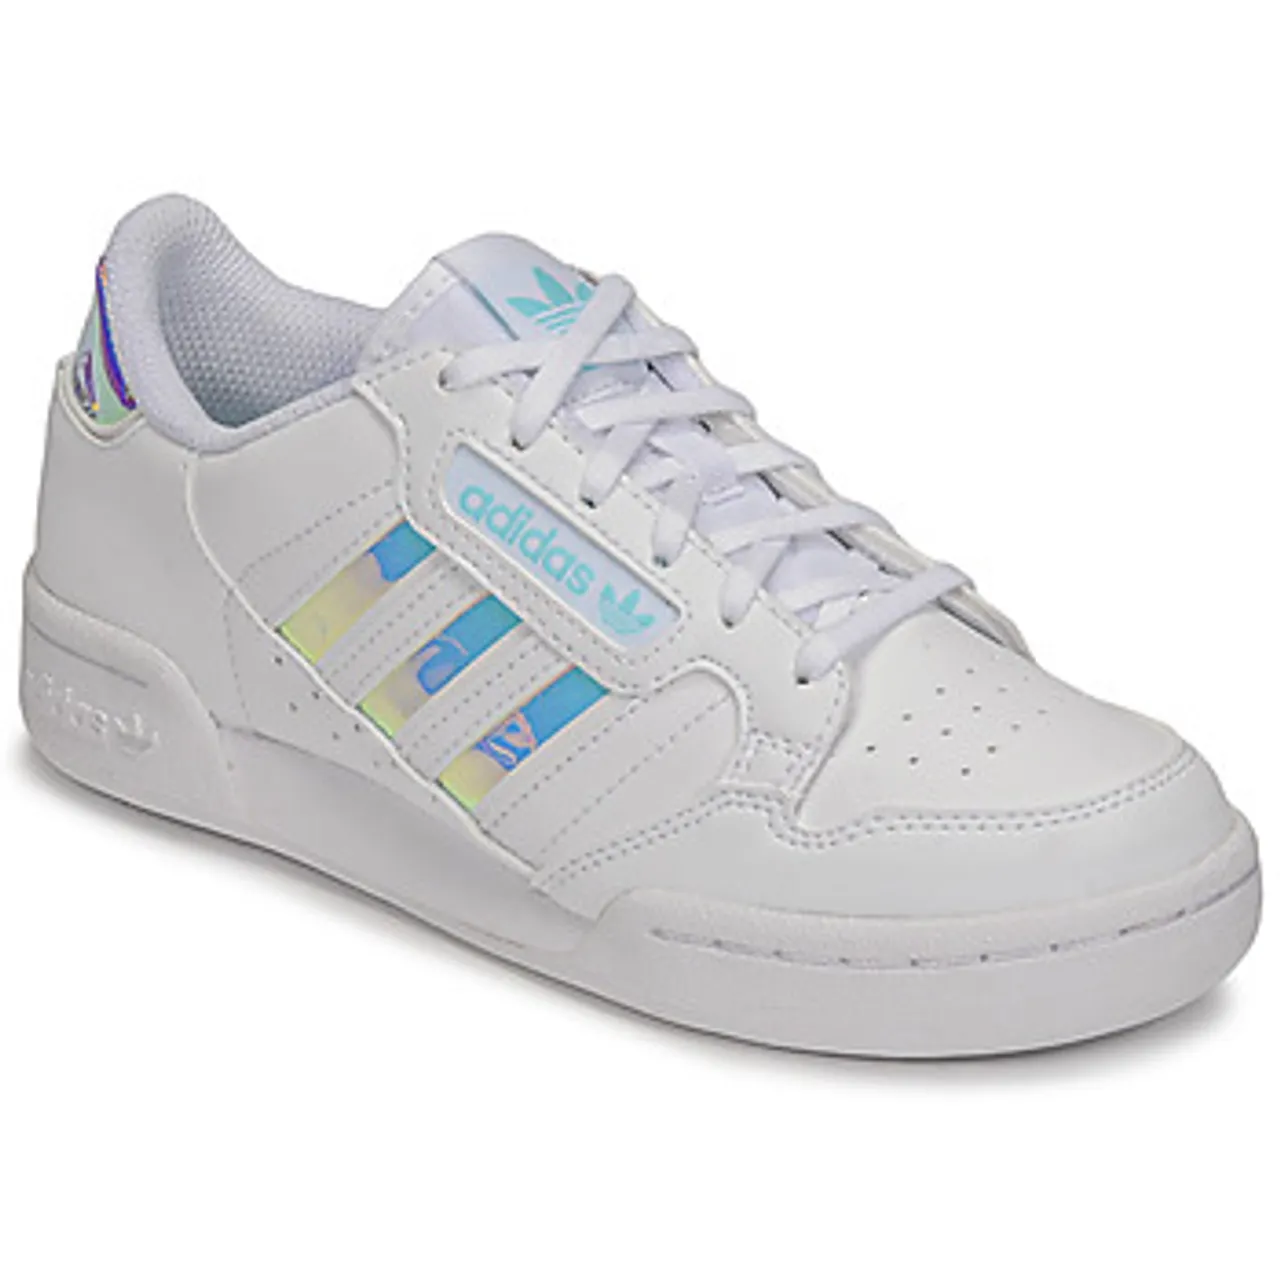 adidas  CONTINENTAL 80 STRI  girls's Children's Shoes (Trainers) in White